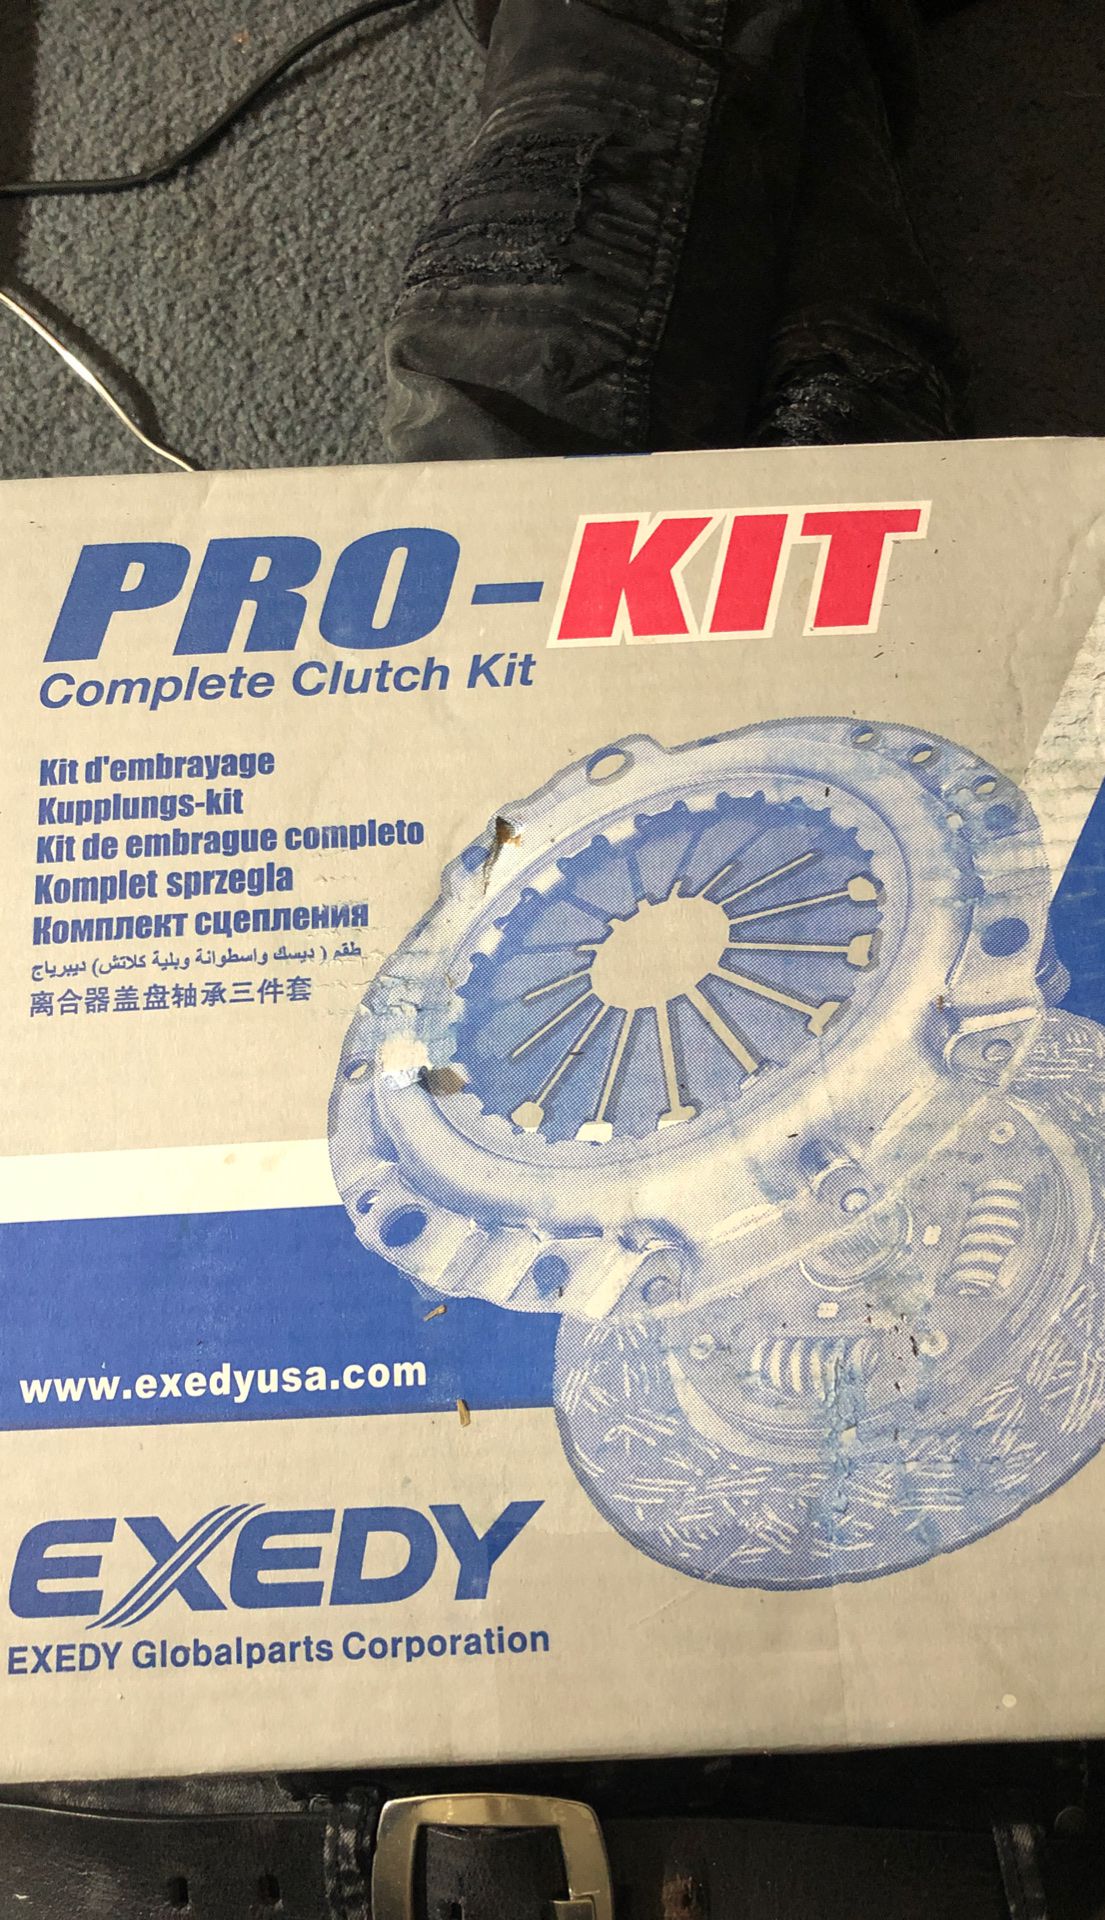 Complete Clutch Pro-Kit by “Exedy”